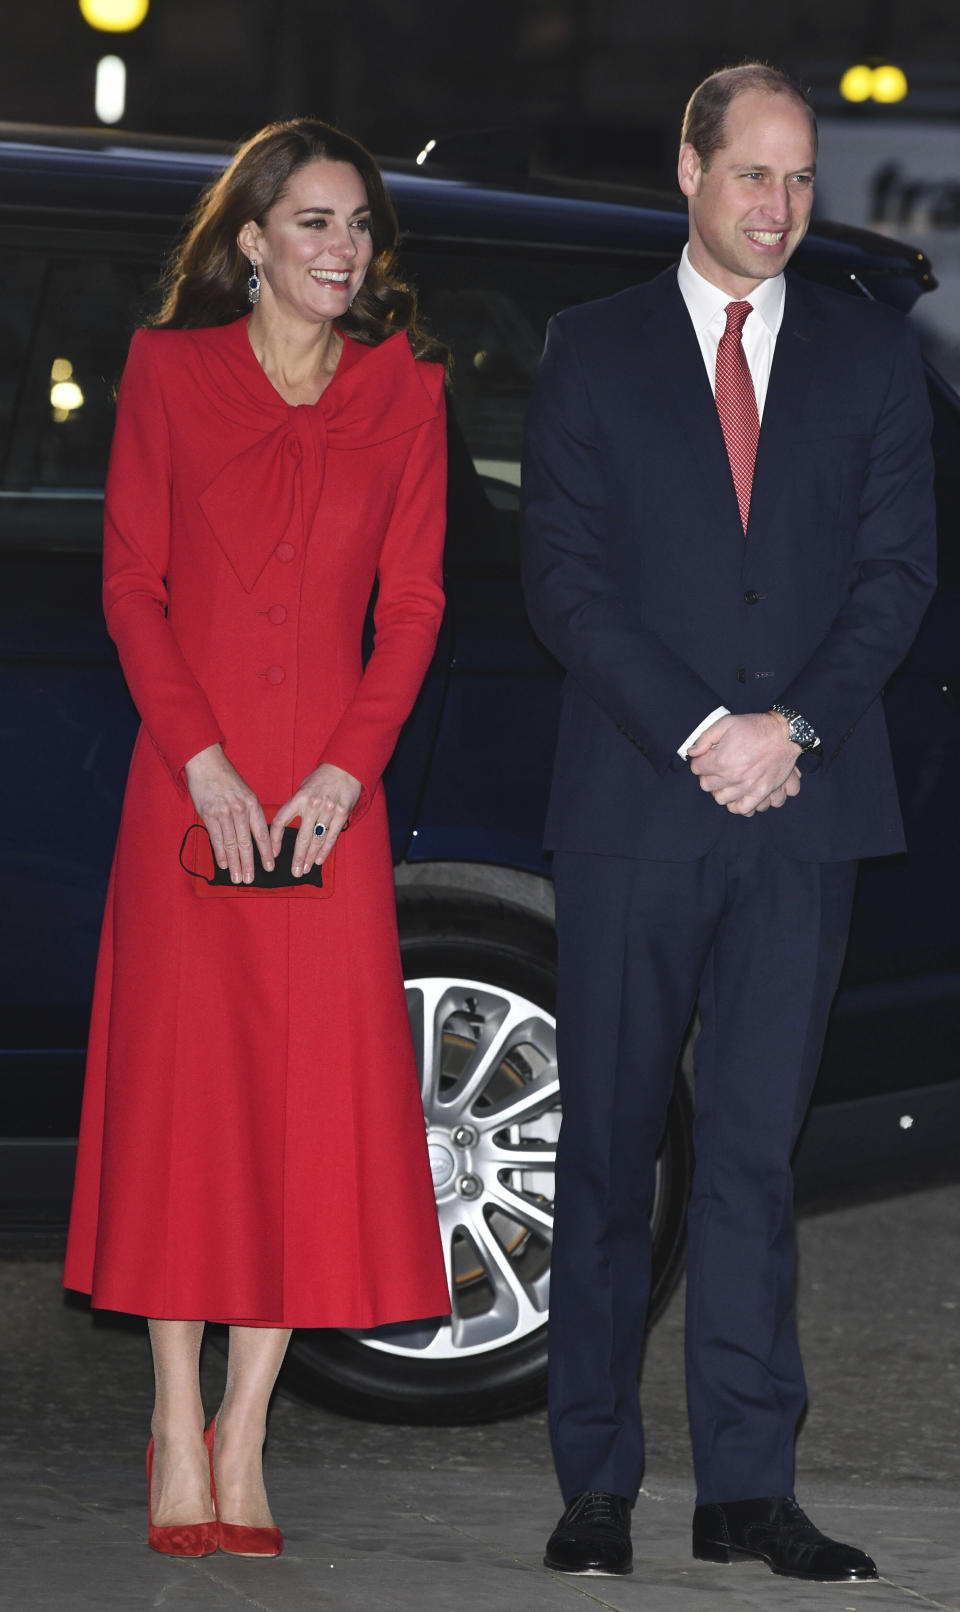 Prince William and Kate Middleton are seen at the “Together At Christmas” community carol service at Westminster Abbey. - Credit: KGC-03/STAR MAX/IPx